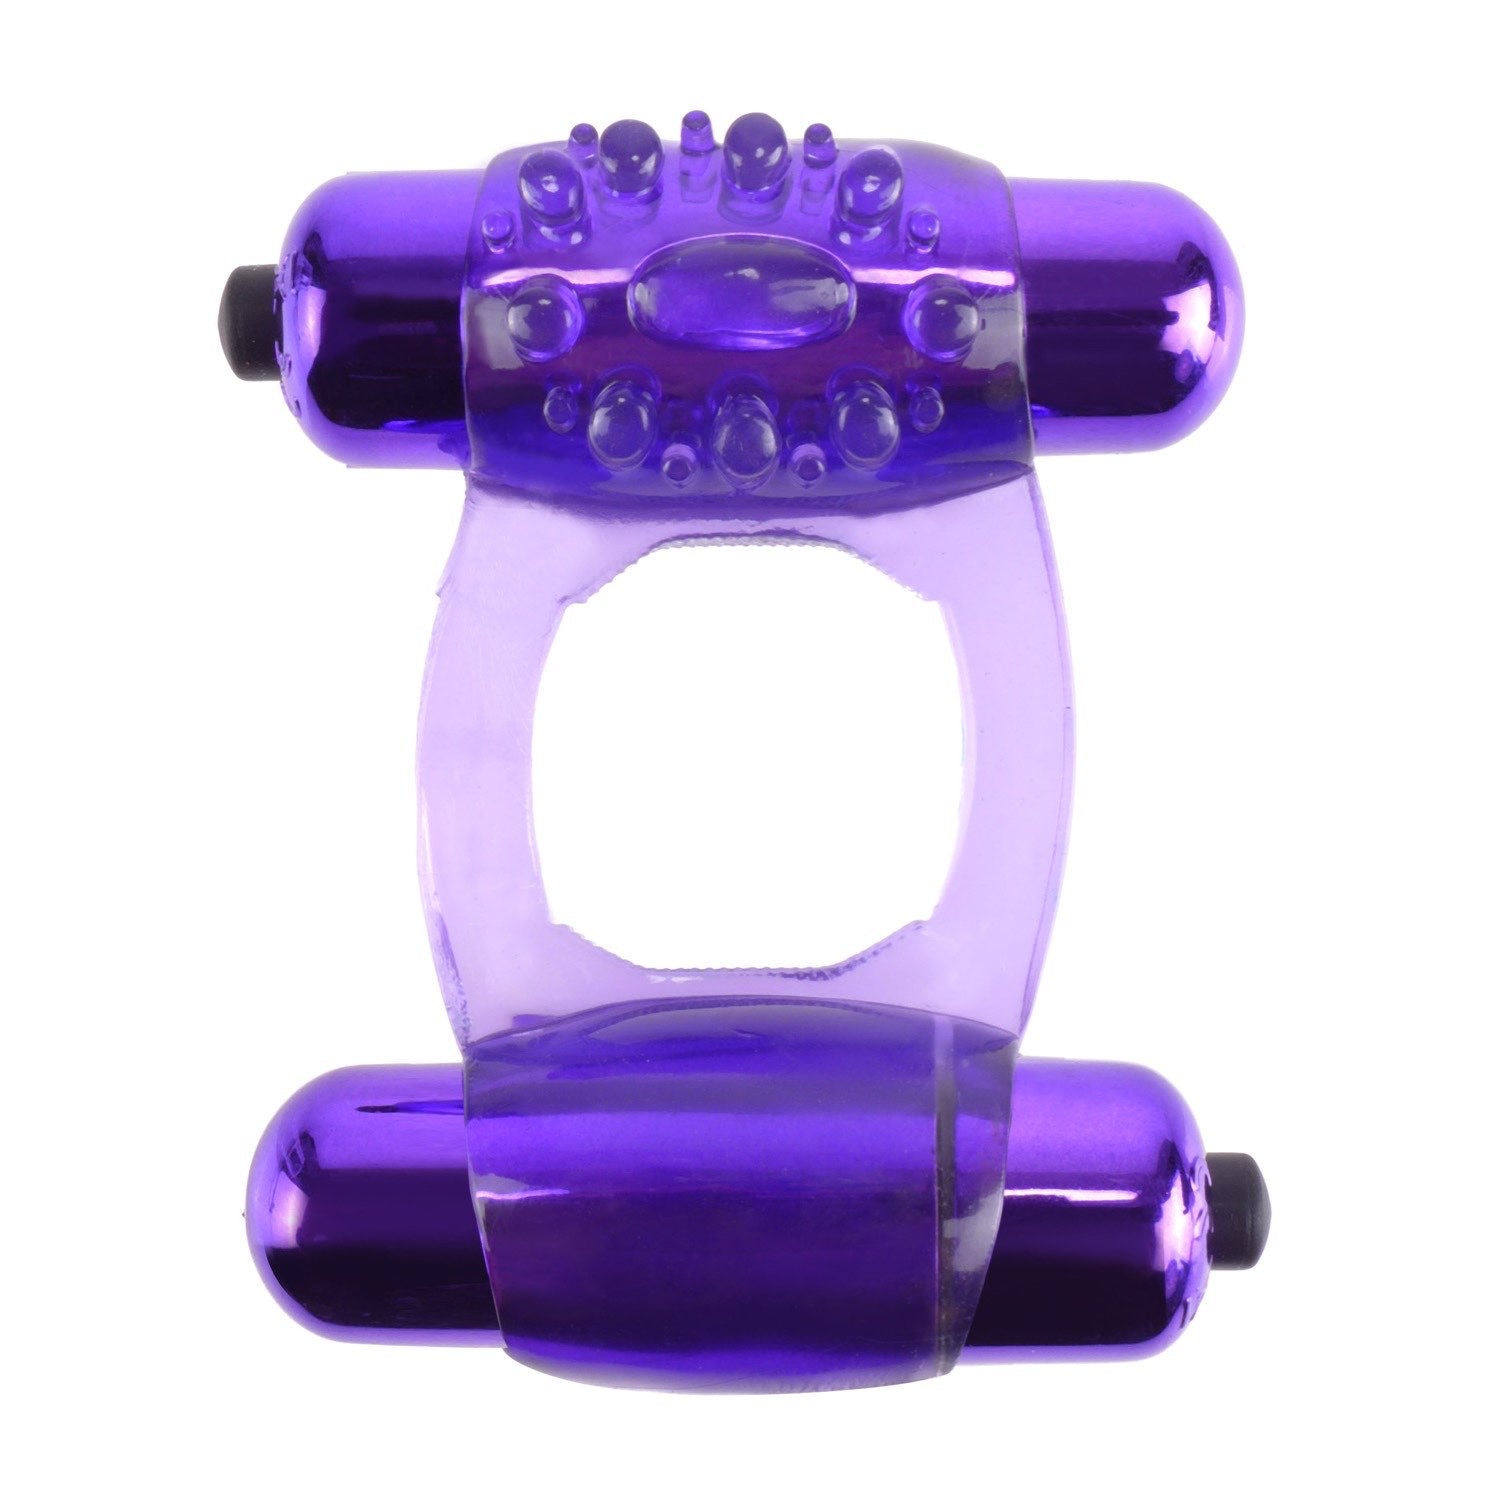 Fantasy C-Ringz Duo-Vibrating Super Ring - Purple Dual Vibrating Cock Ring by Pipedream